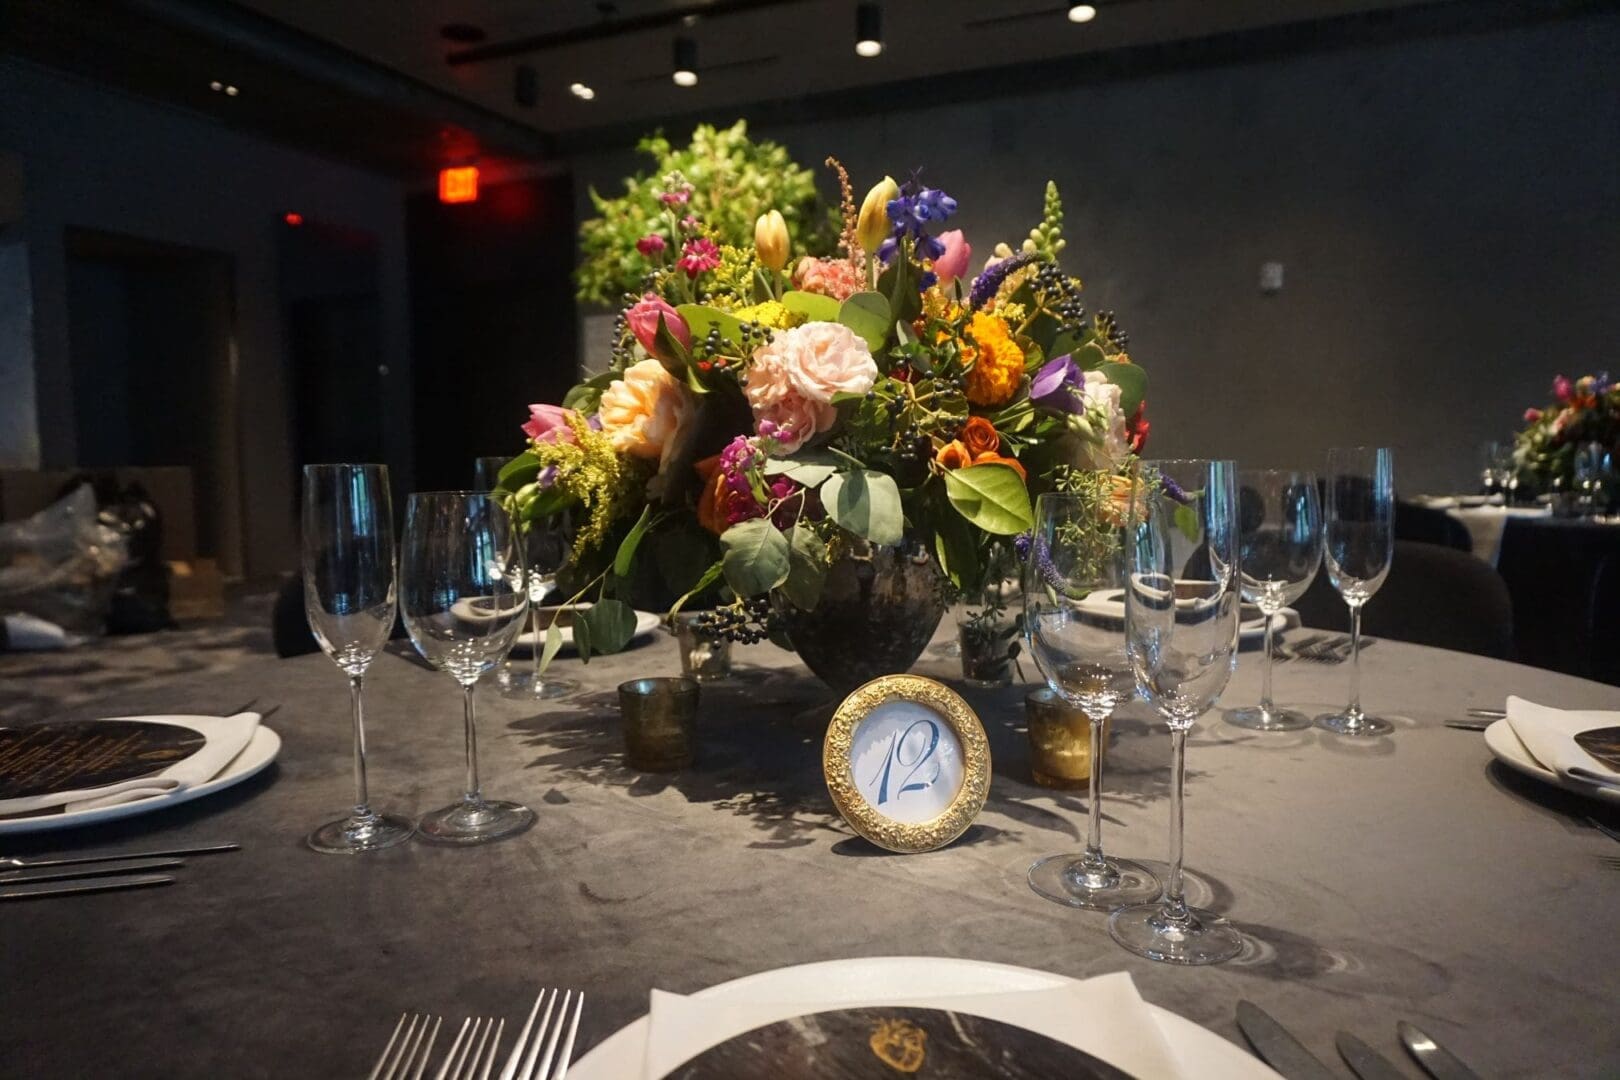 A wedding table scape with flowers and a clock.